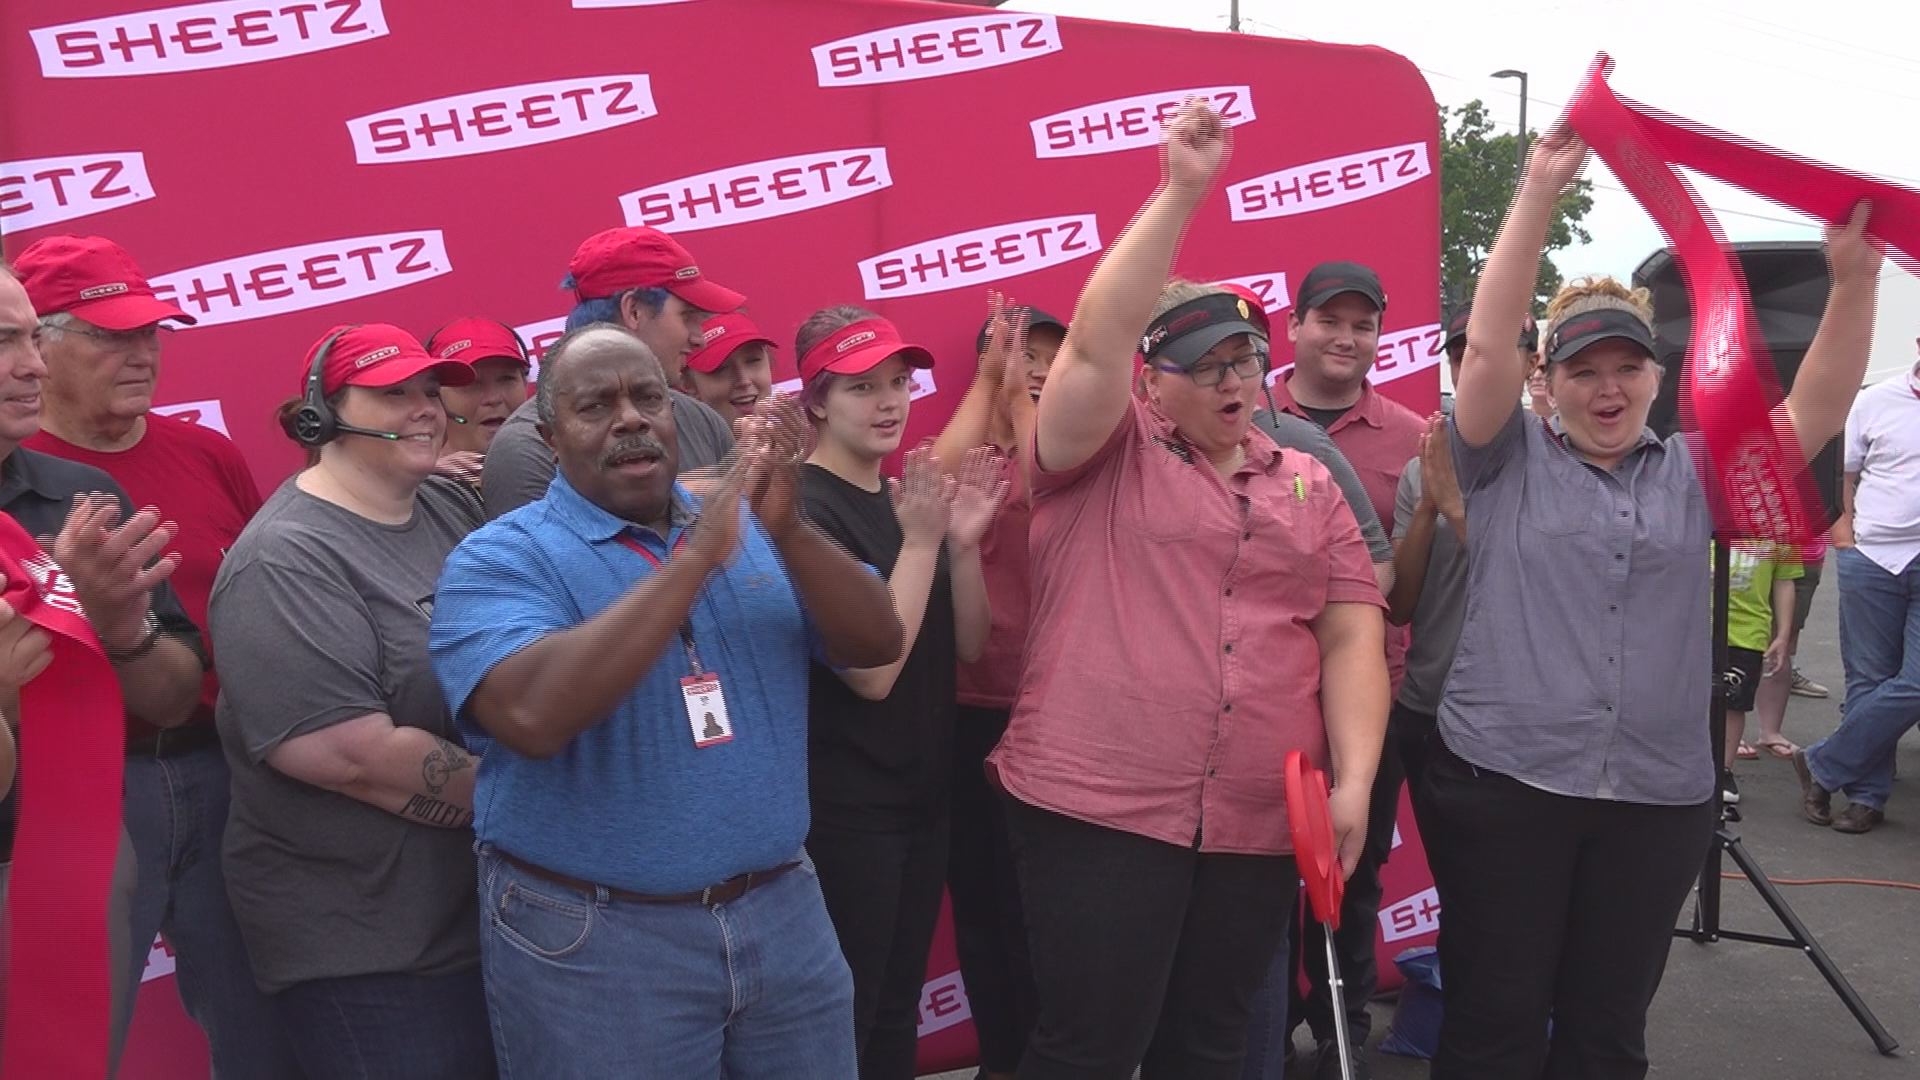 Botetourt County S New Sheetz Store Opens To Crowd Of Customers